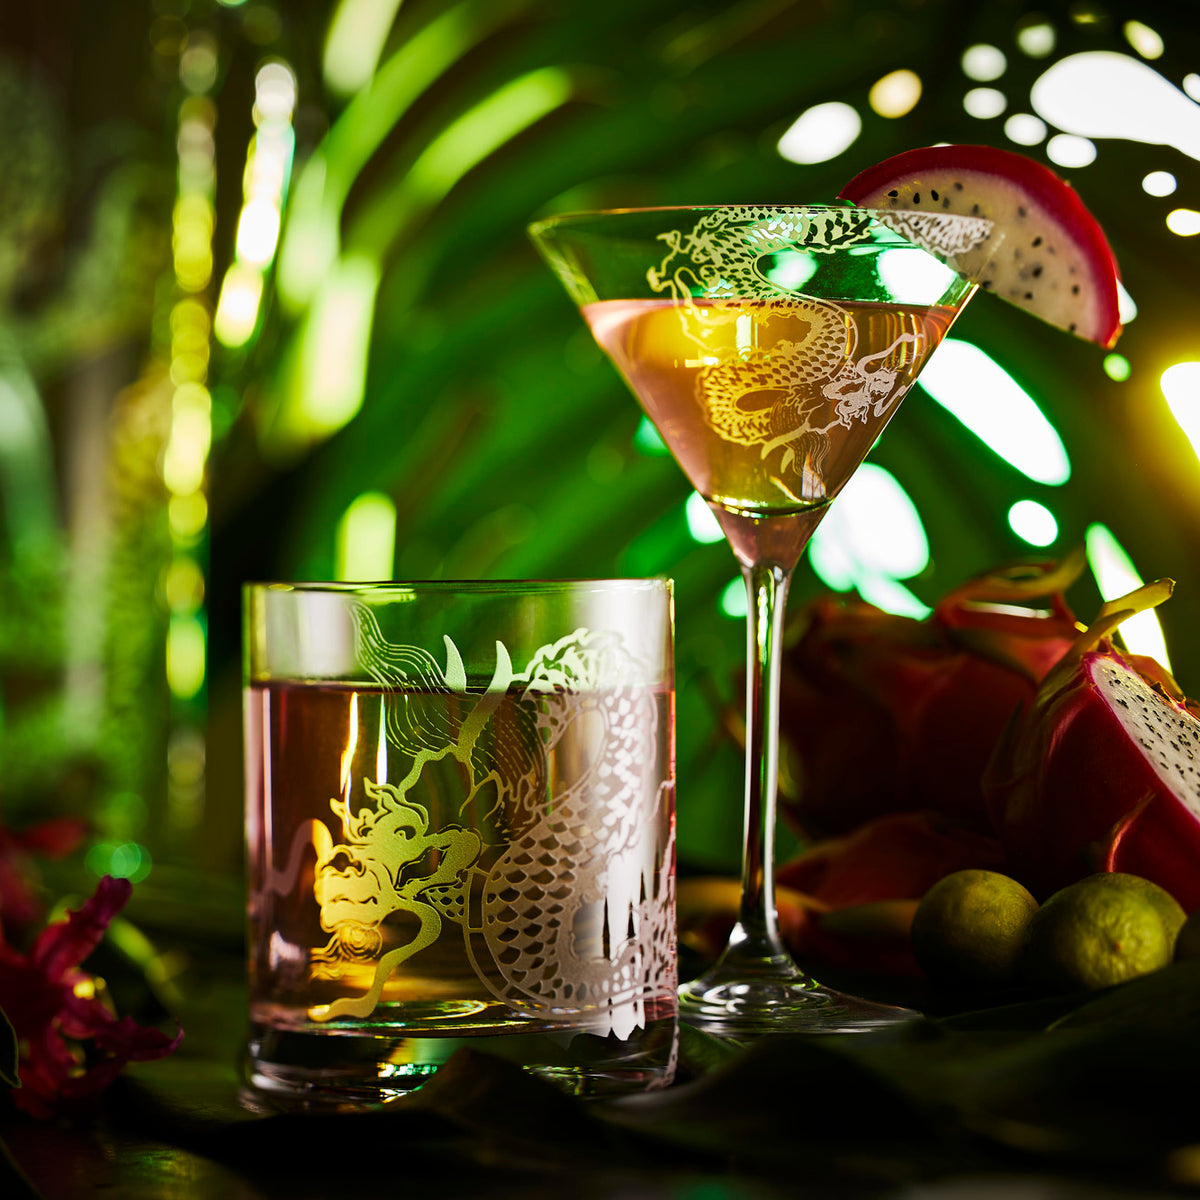 Dragon etched crystal martini glass and Double Old Fashion tumbler glass in a tropical setting with passionfruit cocktails from Caskata